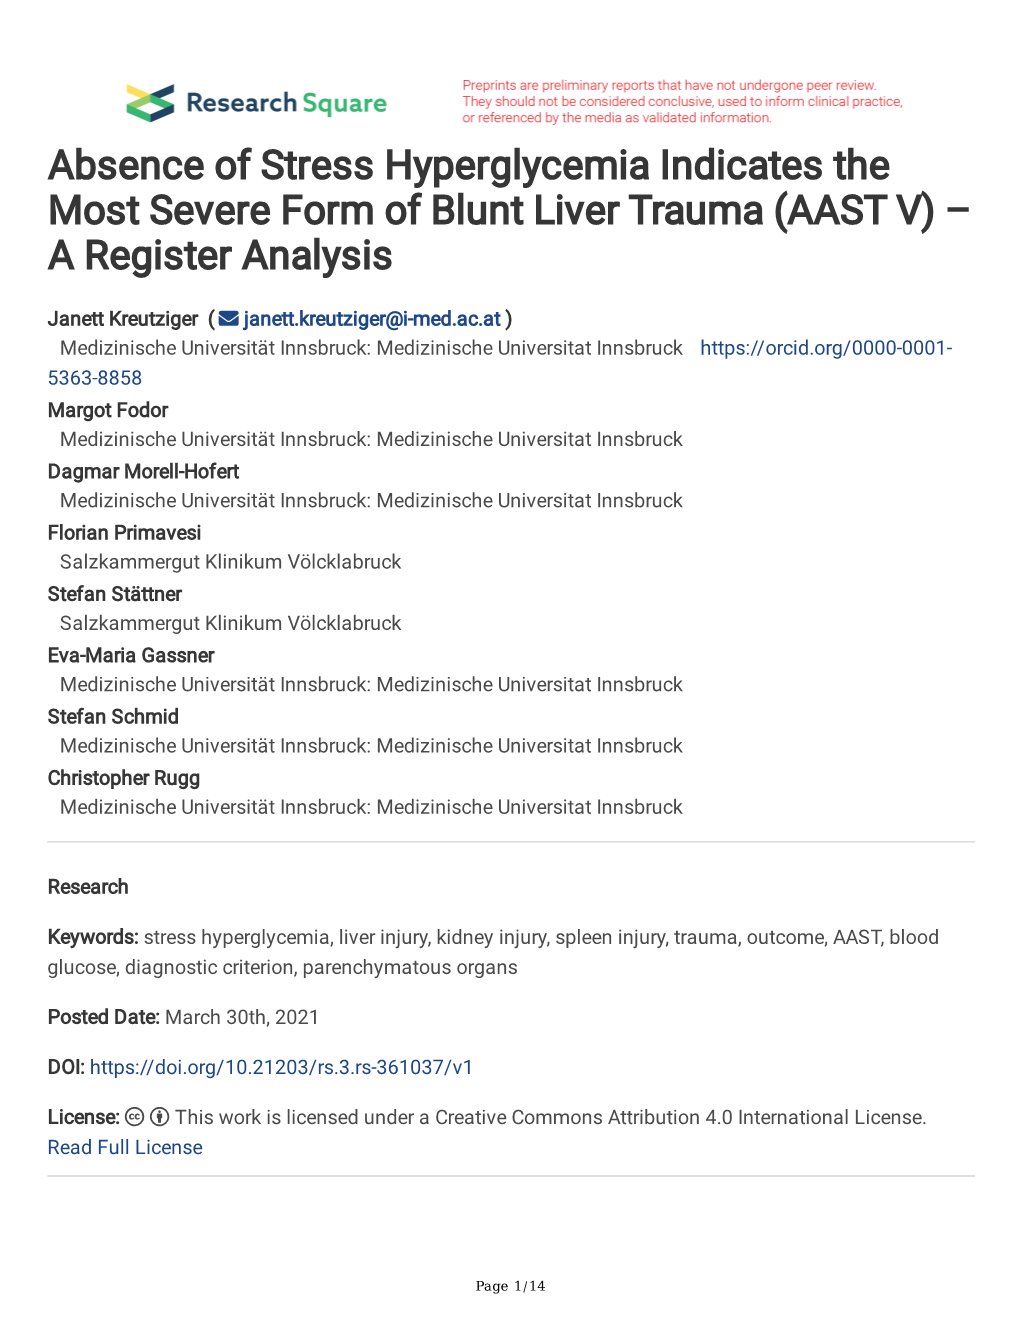 Absence of Stress Hyperglycemia Indicates the Most Severe Form of Blunt Liver Trauma (AAST V) – a Register Analysis